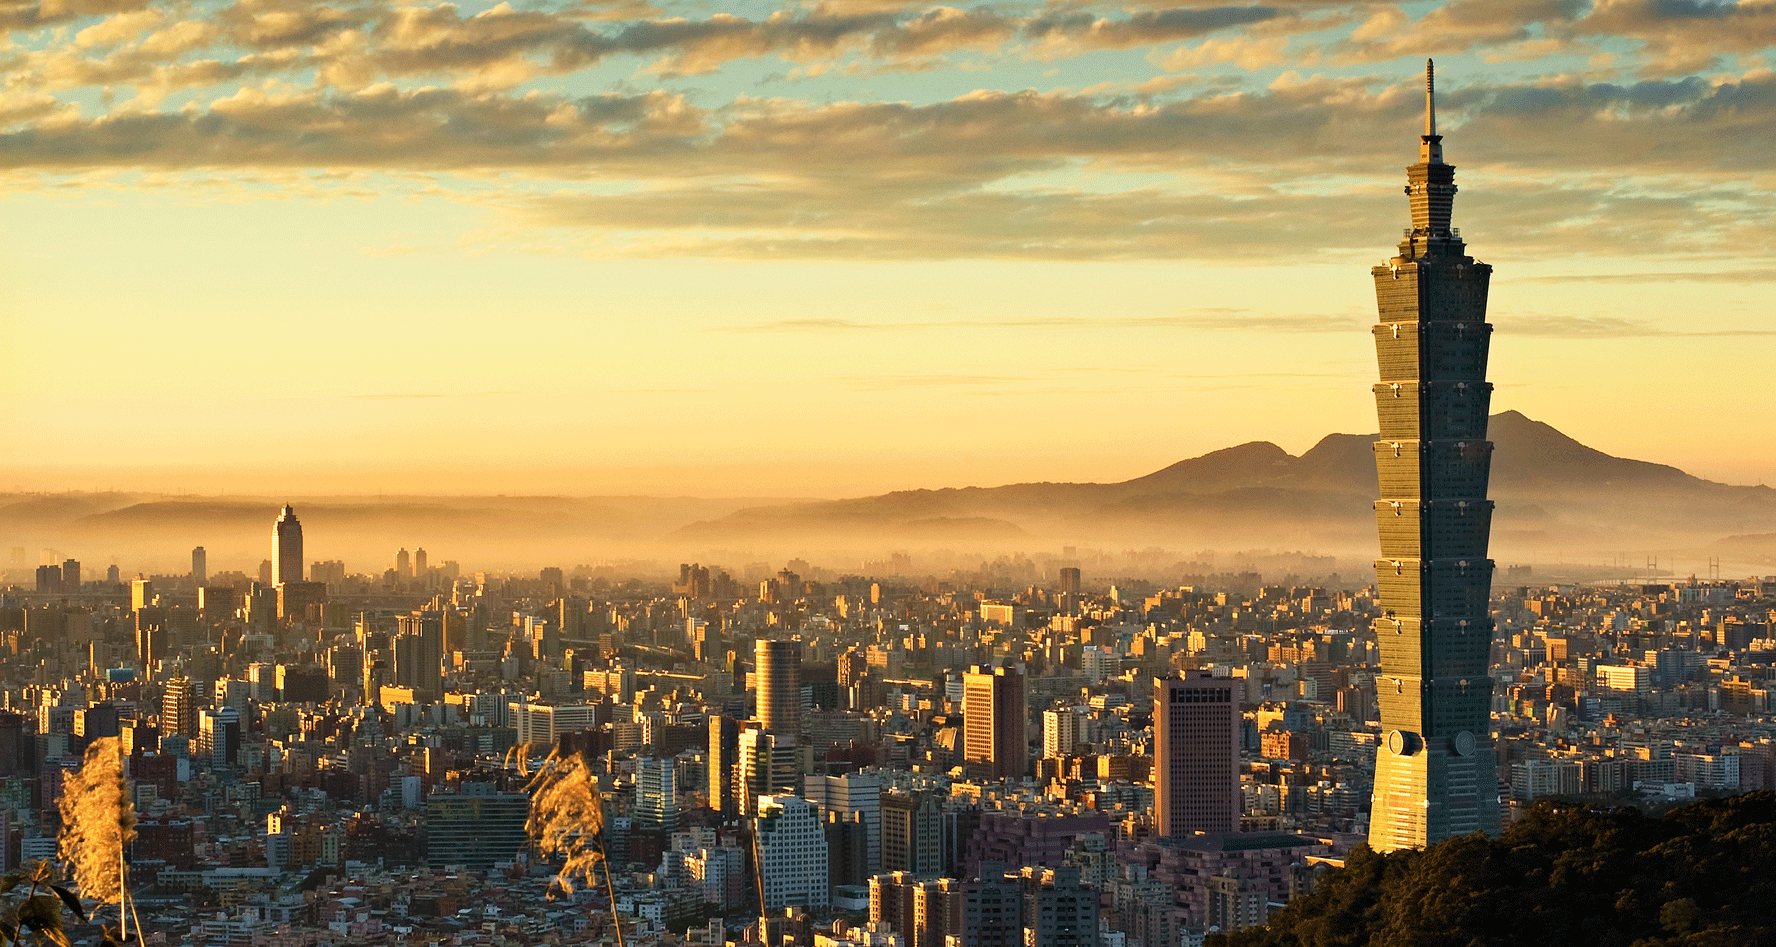 Taiwan skyline background for Sourcing